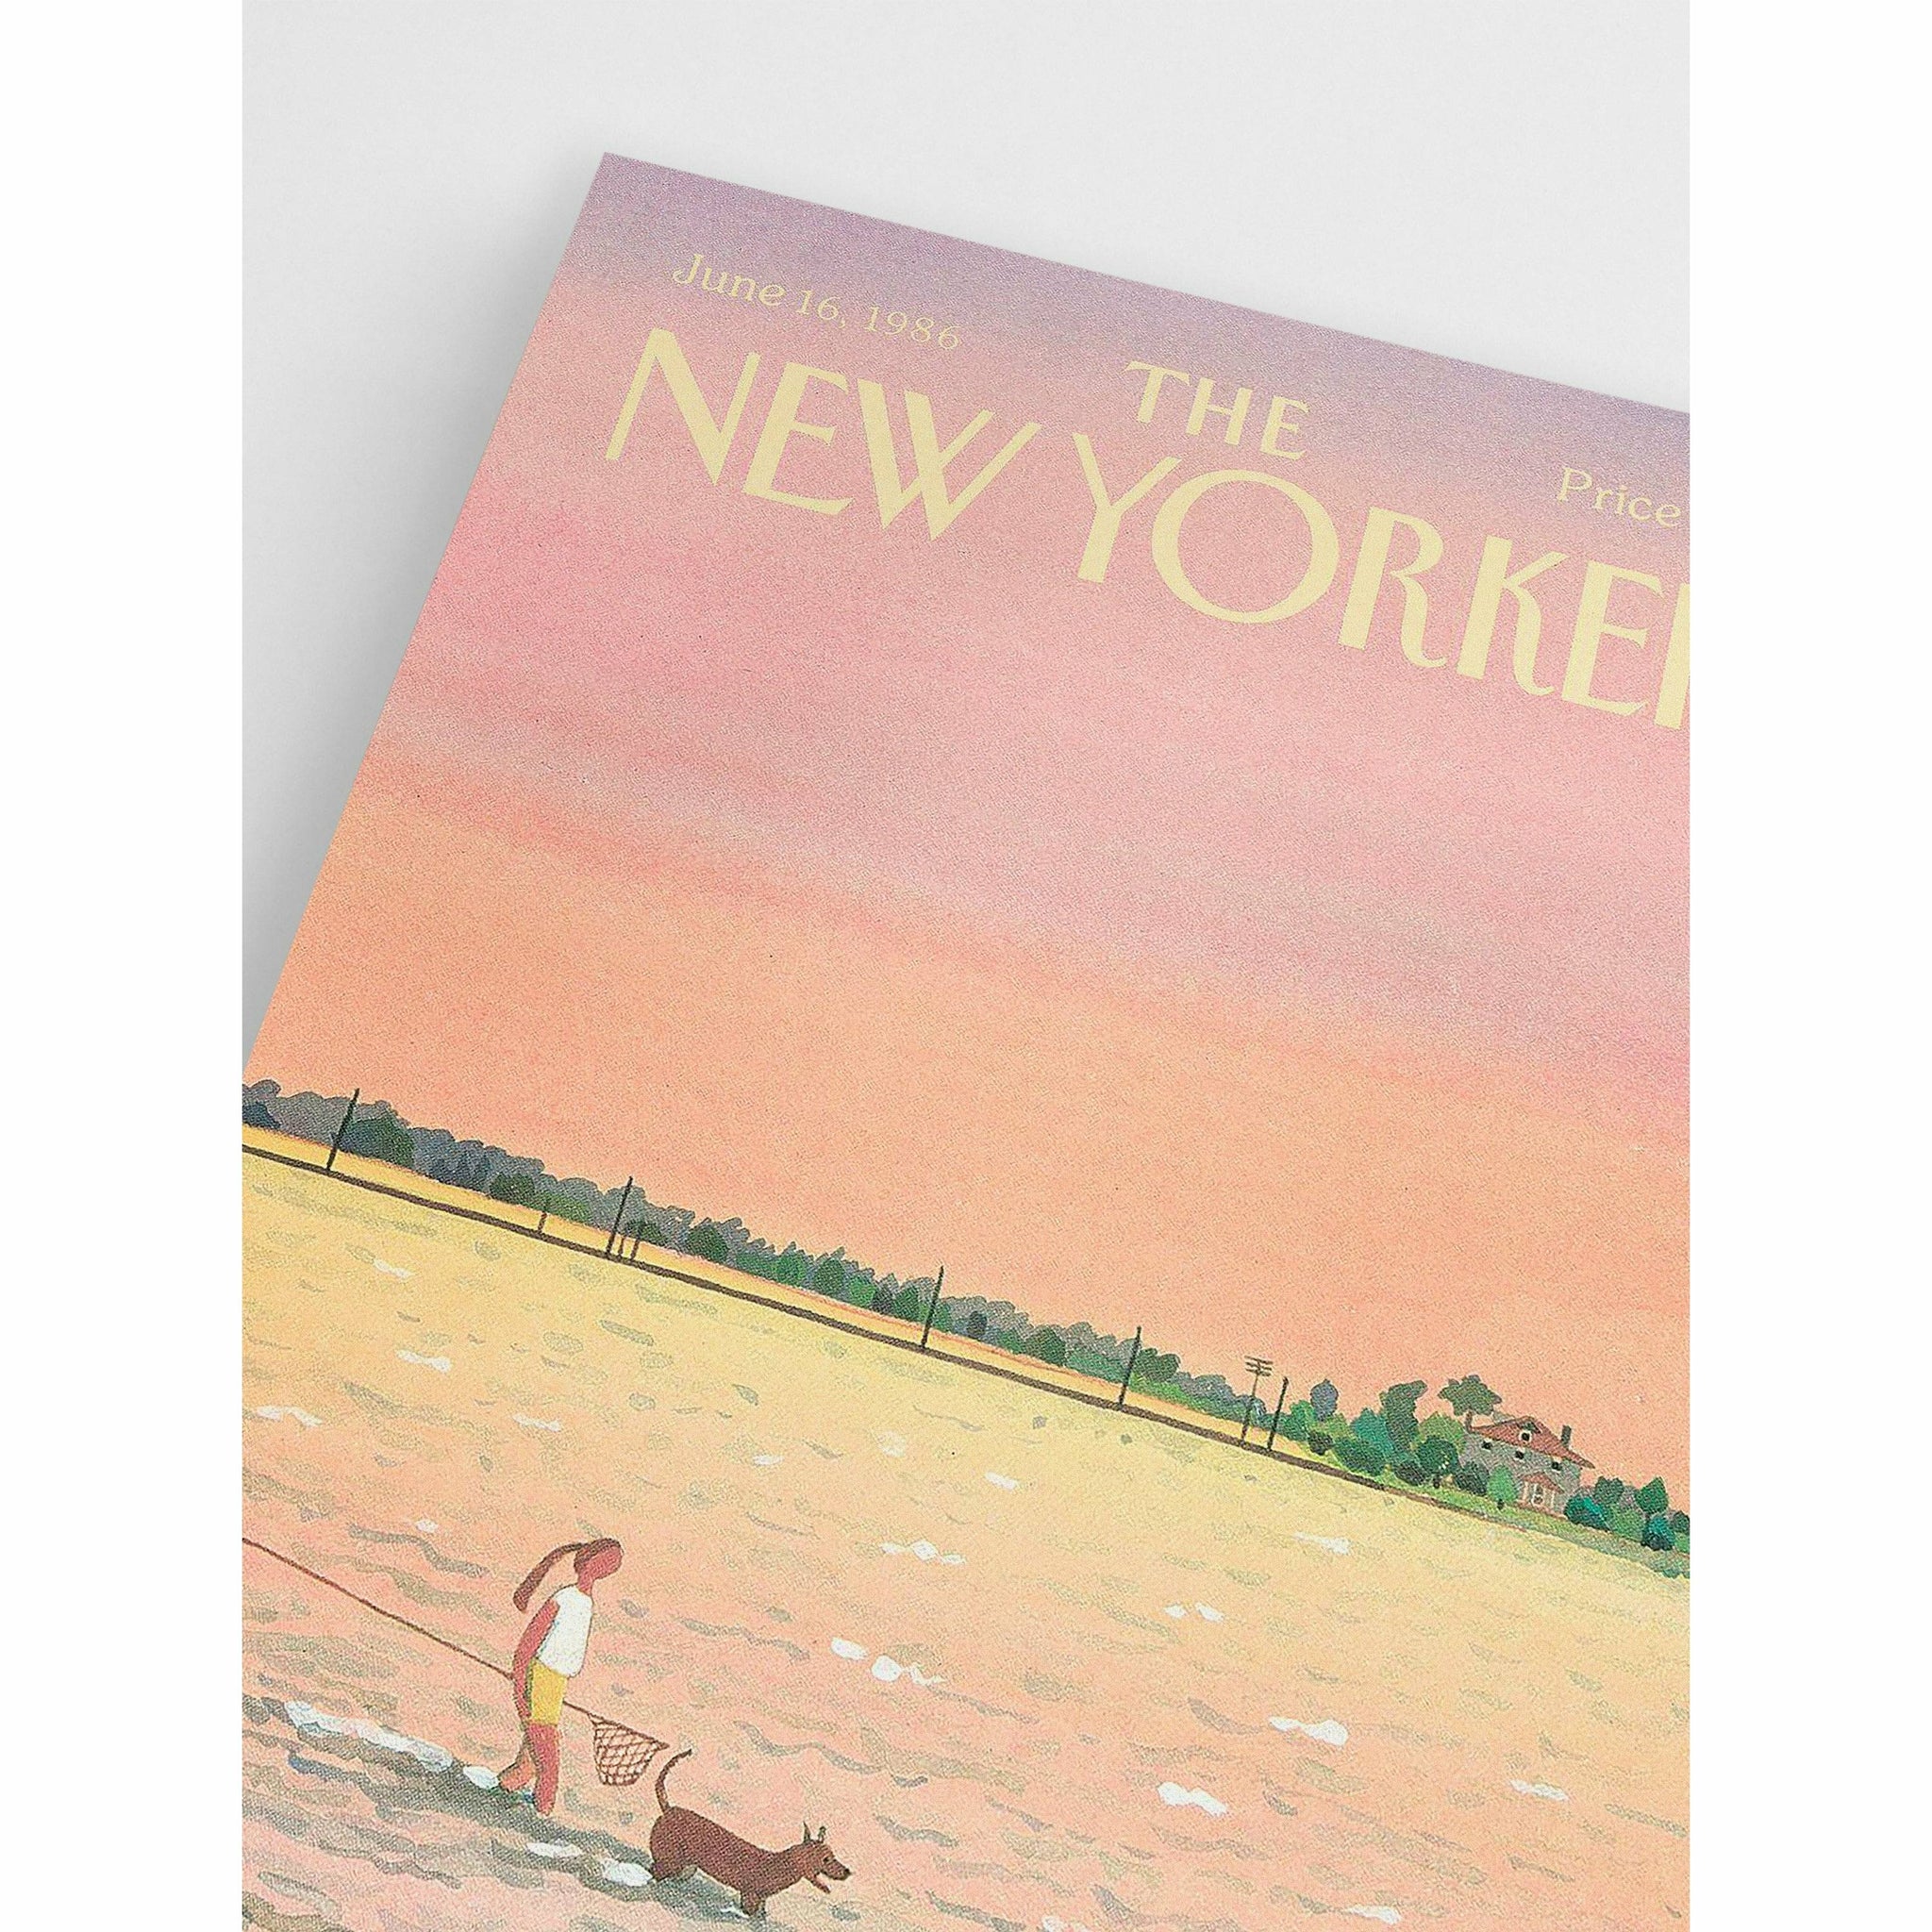 The New Yorker june 1986 Poster